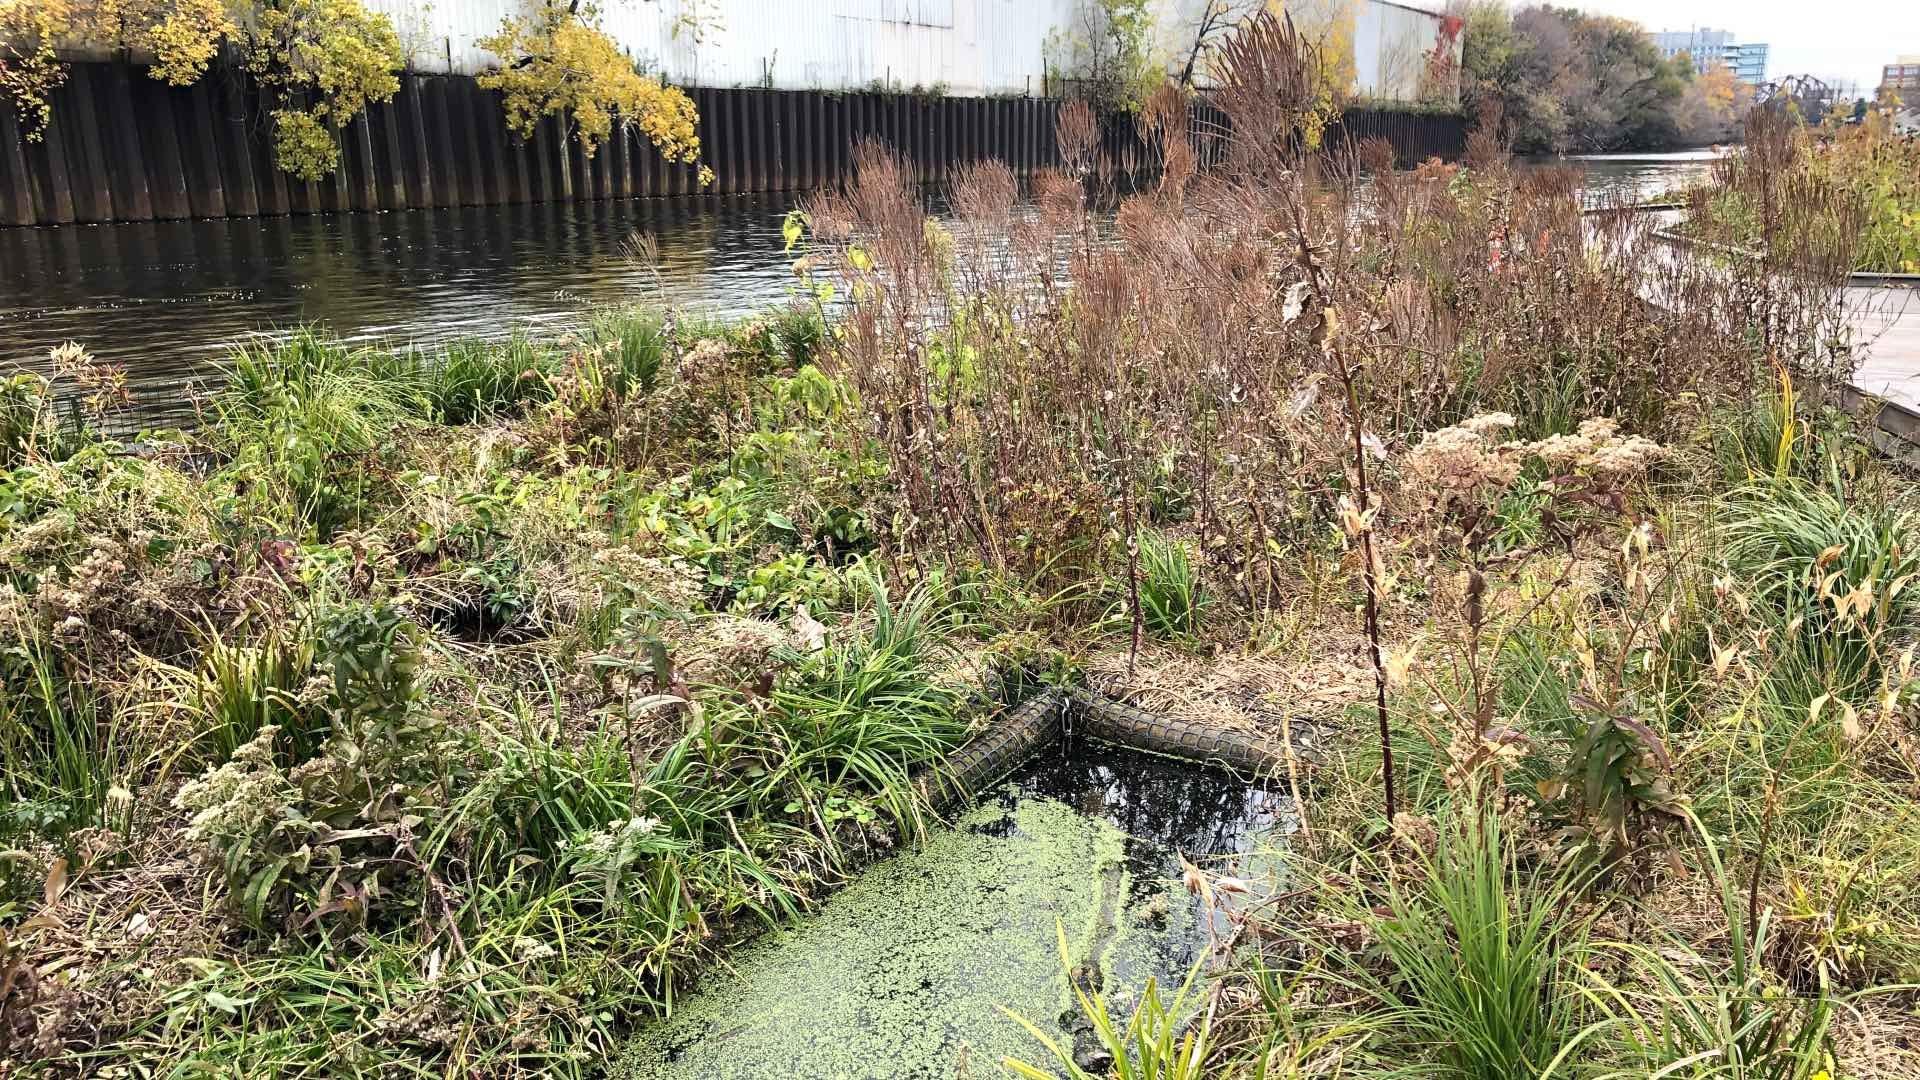 Once plants mature, the floating wetlands in the South Branch will resemble the Wild Mile on the North Branch, pictured. (Patty Wetli / WTTW News)